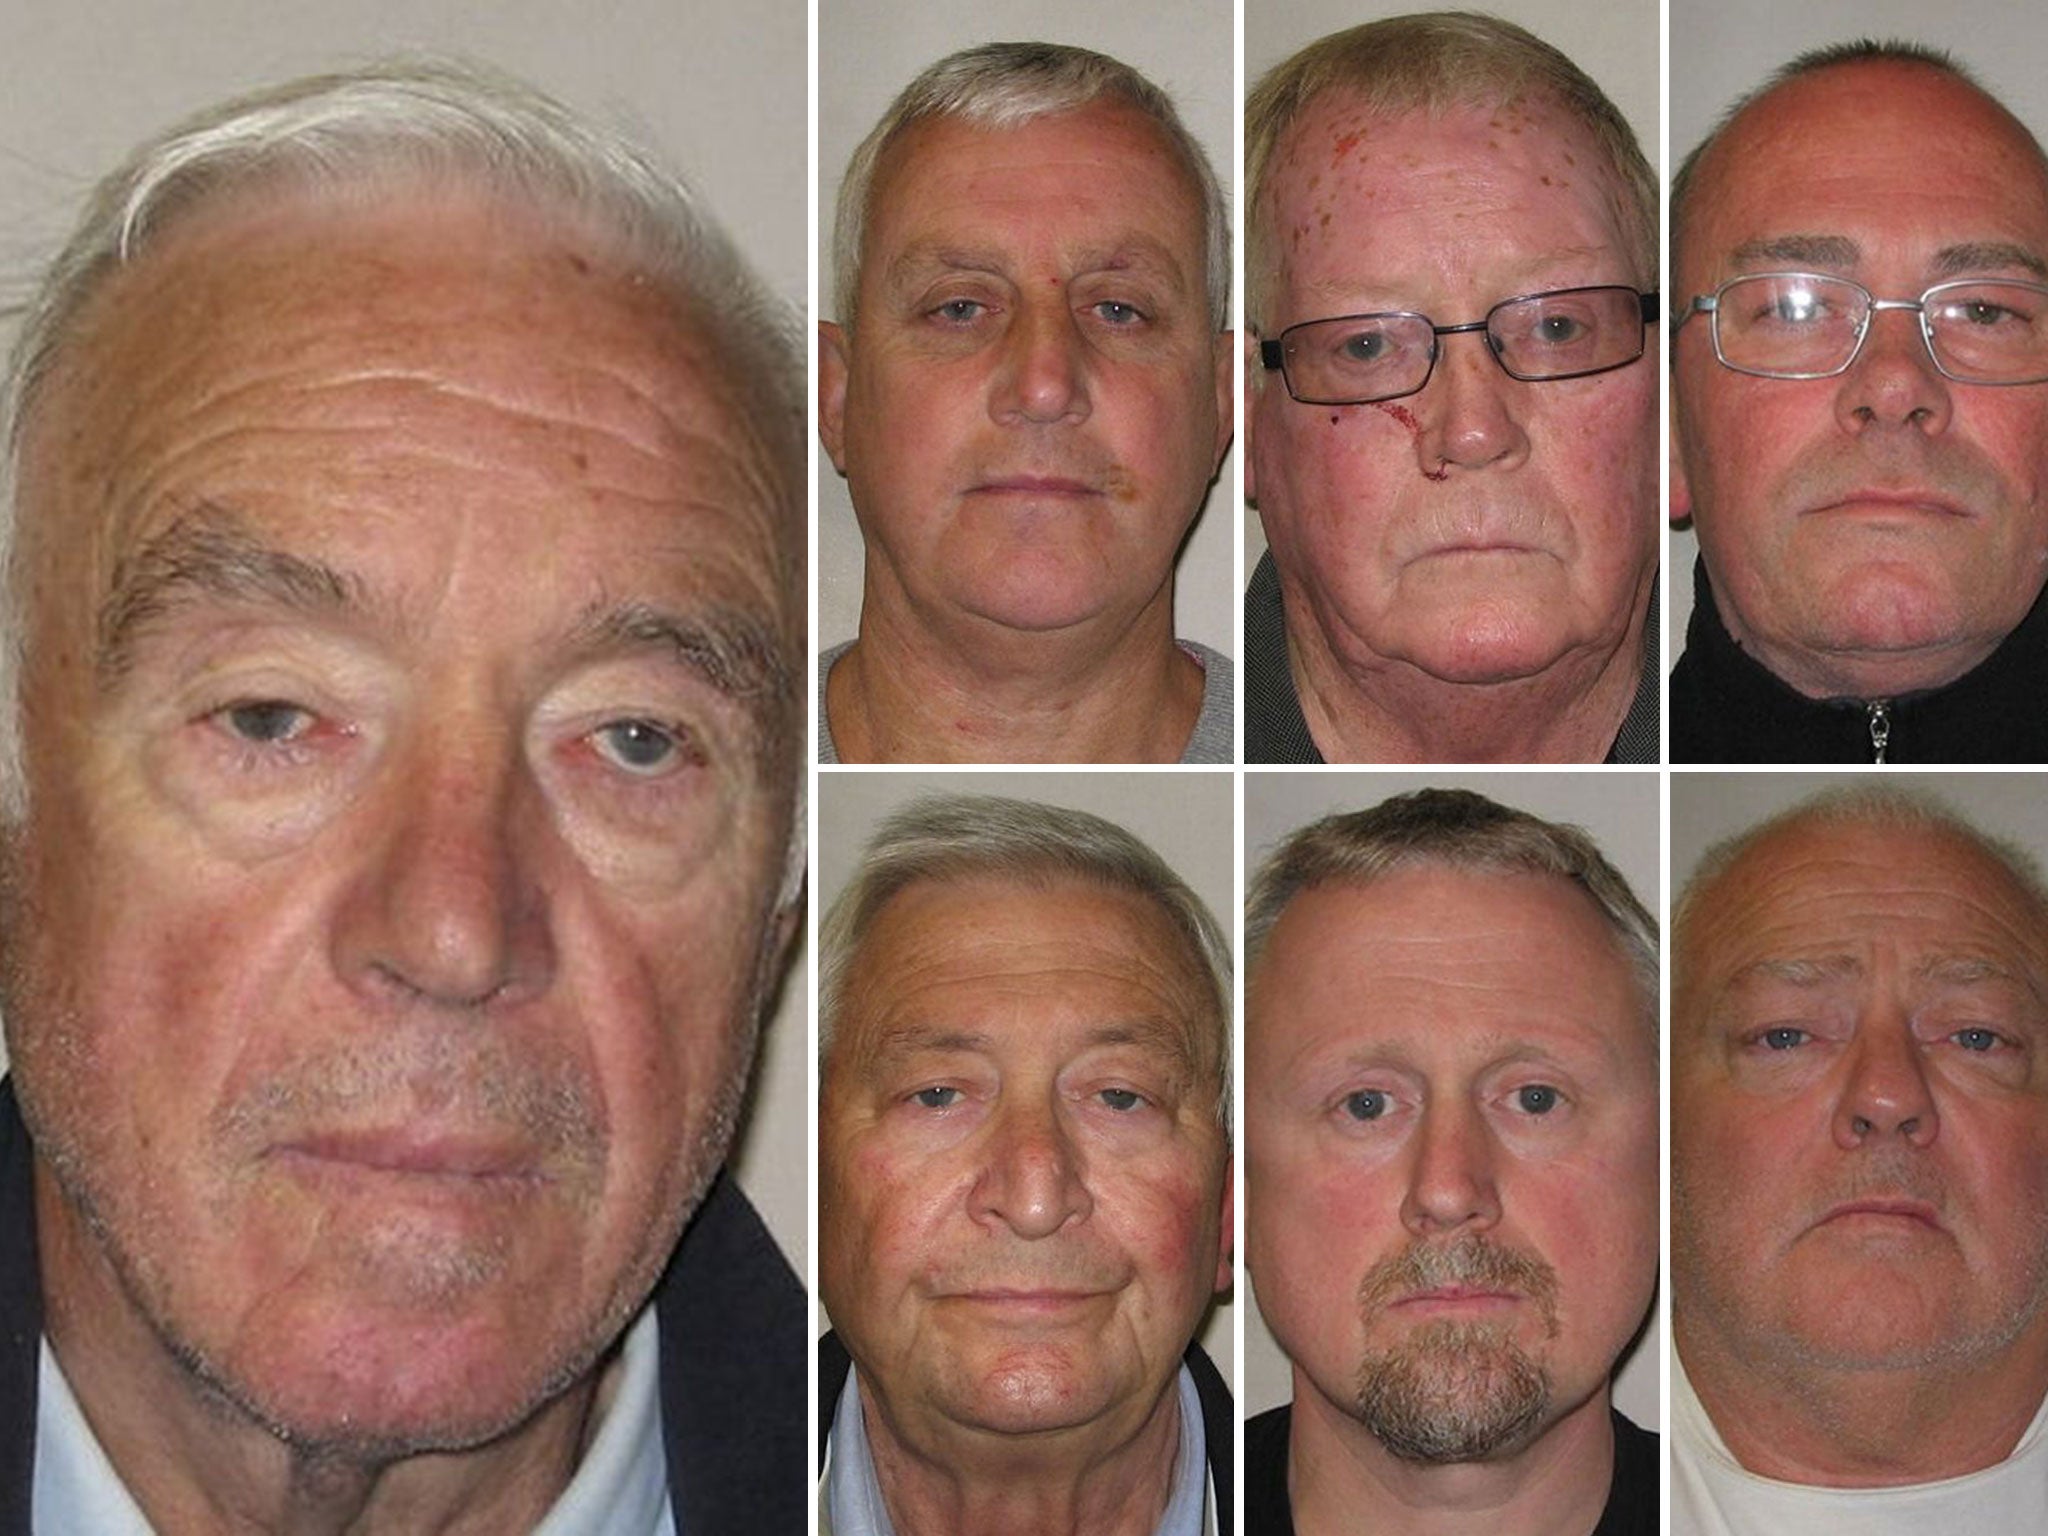 Clockwise from top left: Brian Reader, Daniel Jones, John Collins, Carl Wood, William Lincoln, Hugh Doyle and Terry Perkins